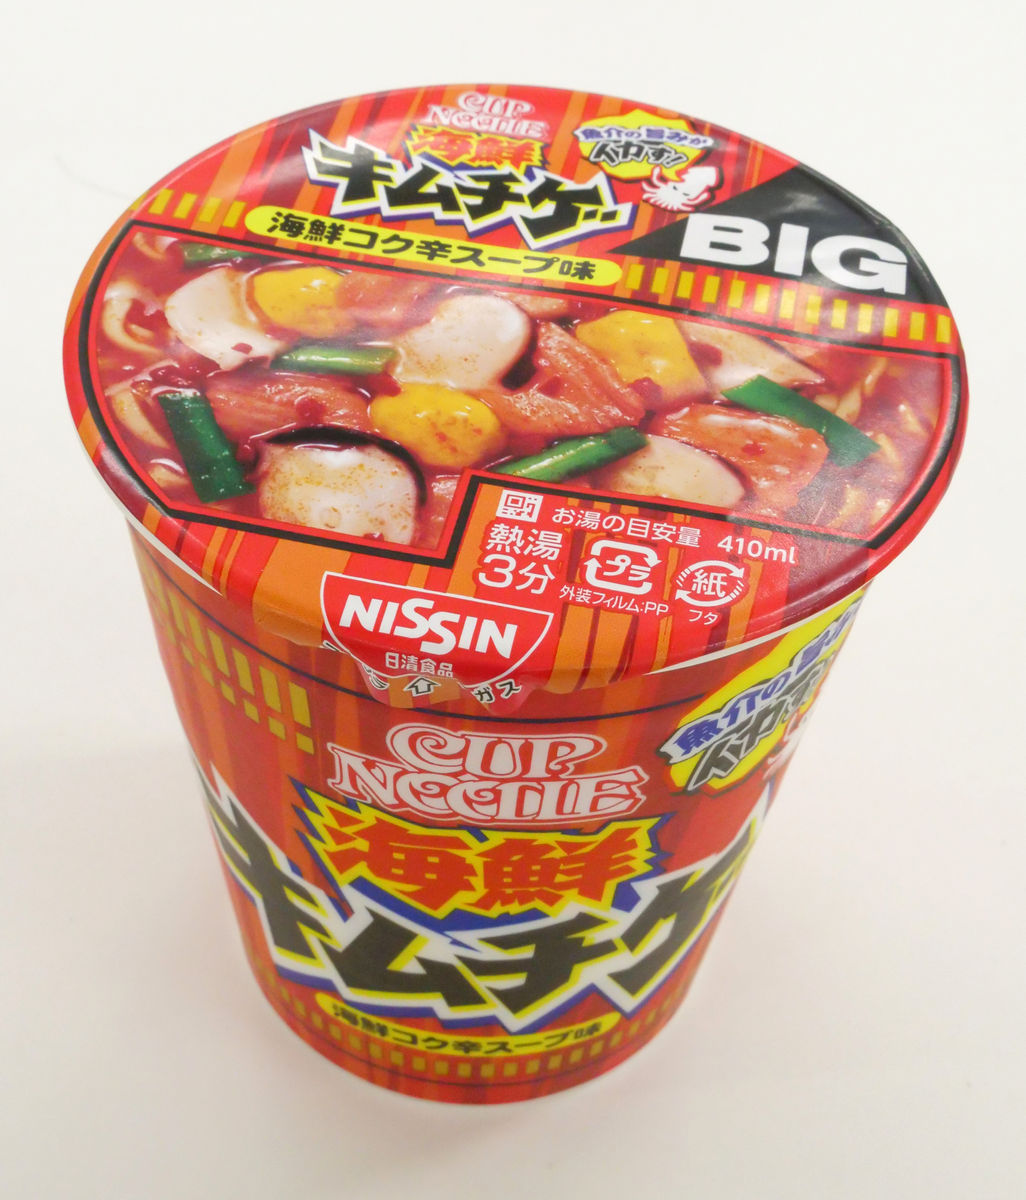 Kimchi Hot Pot Cup Noodles With Rich Clam Flavor Cup Noodle Seafood Kimchige Big Tasting Review Gigazine